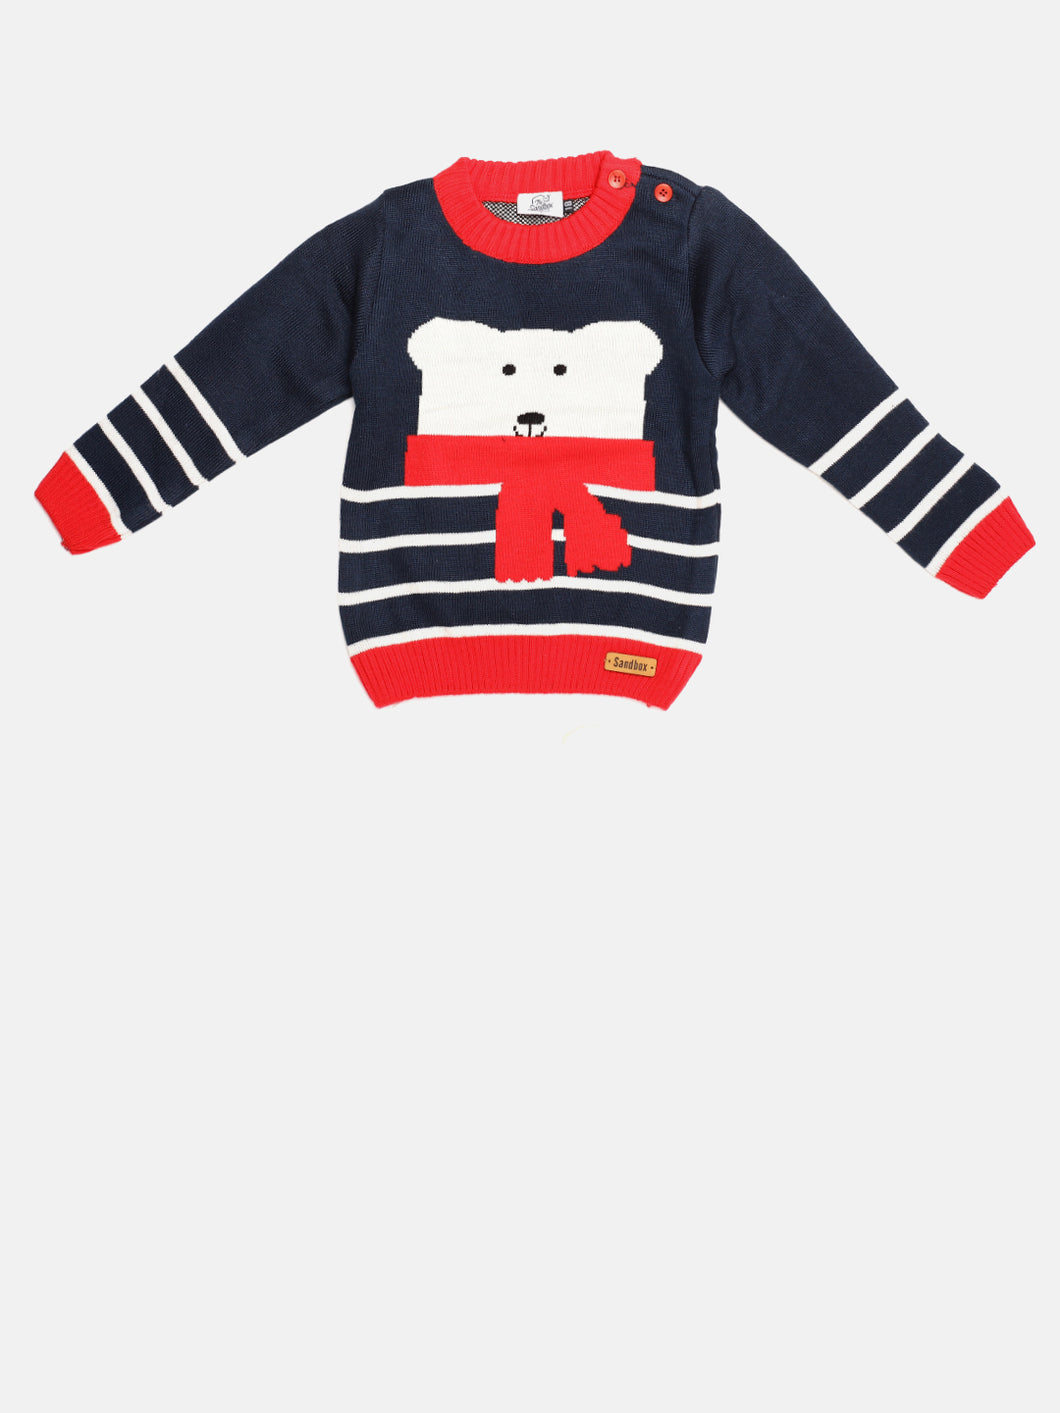 Boys winter woolen full sleeves round neck  sweater in navy, white and red combination